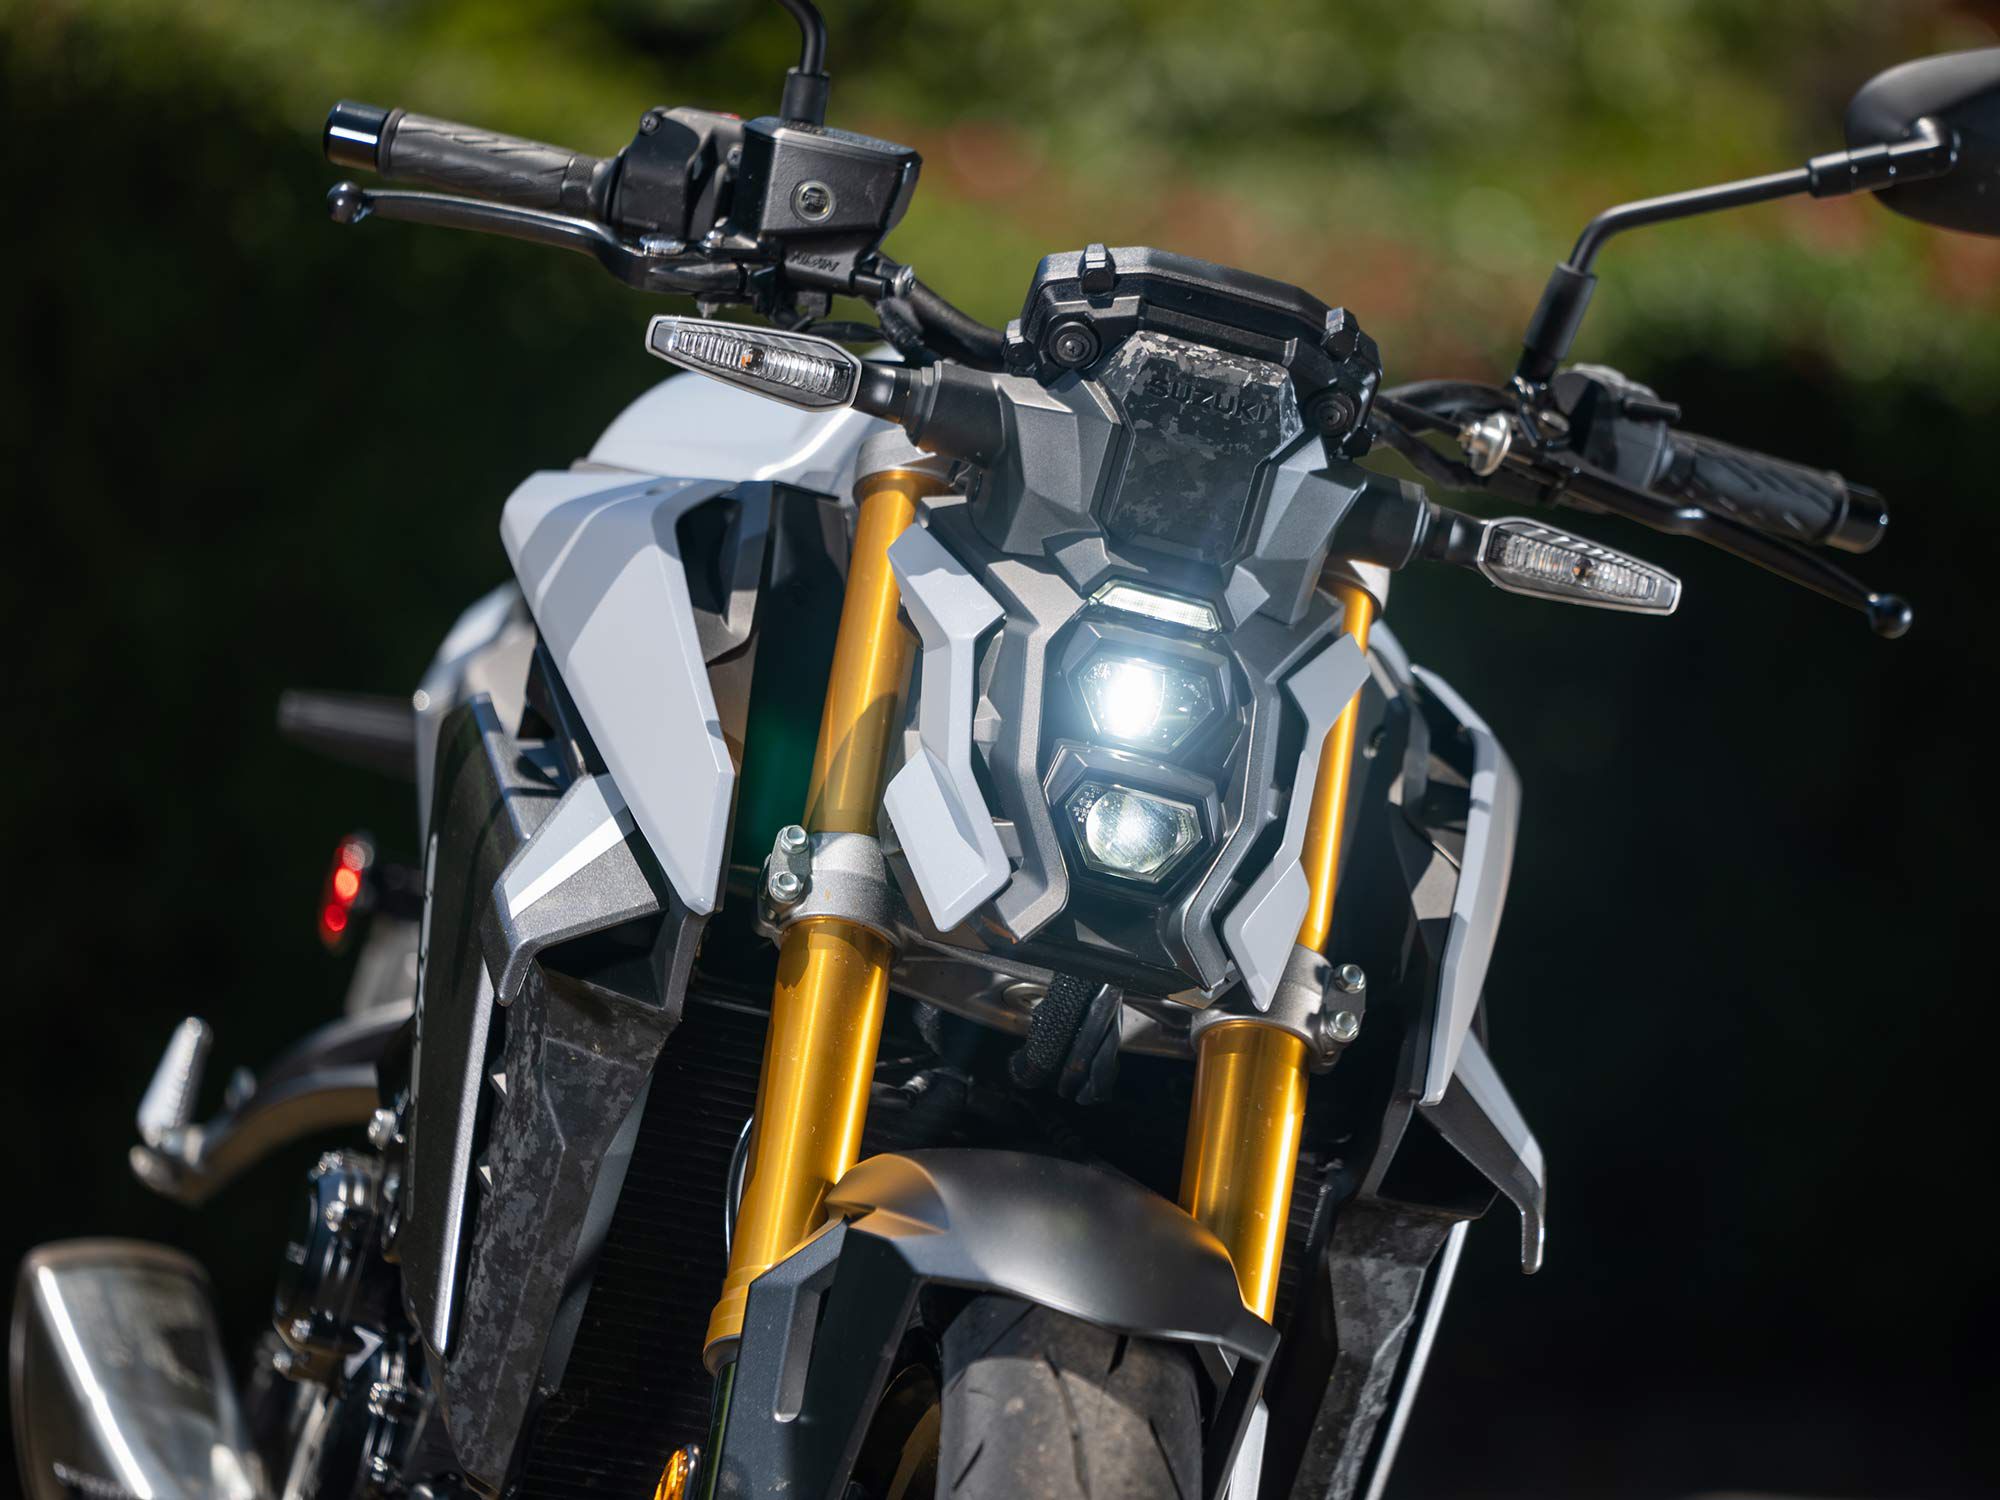 Stacked LED headlamps offer a narrower profile while providing improved visibility during night rides.